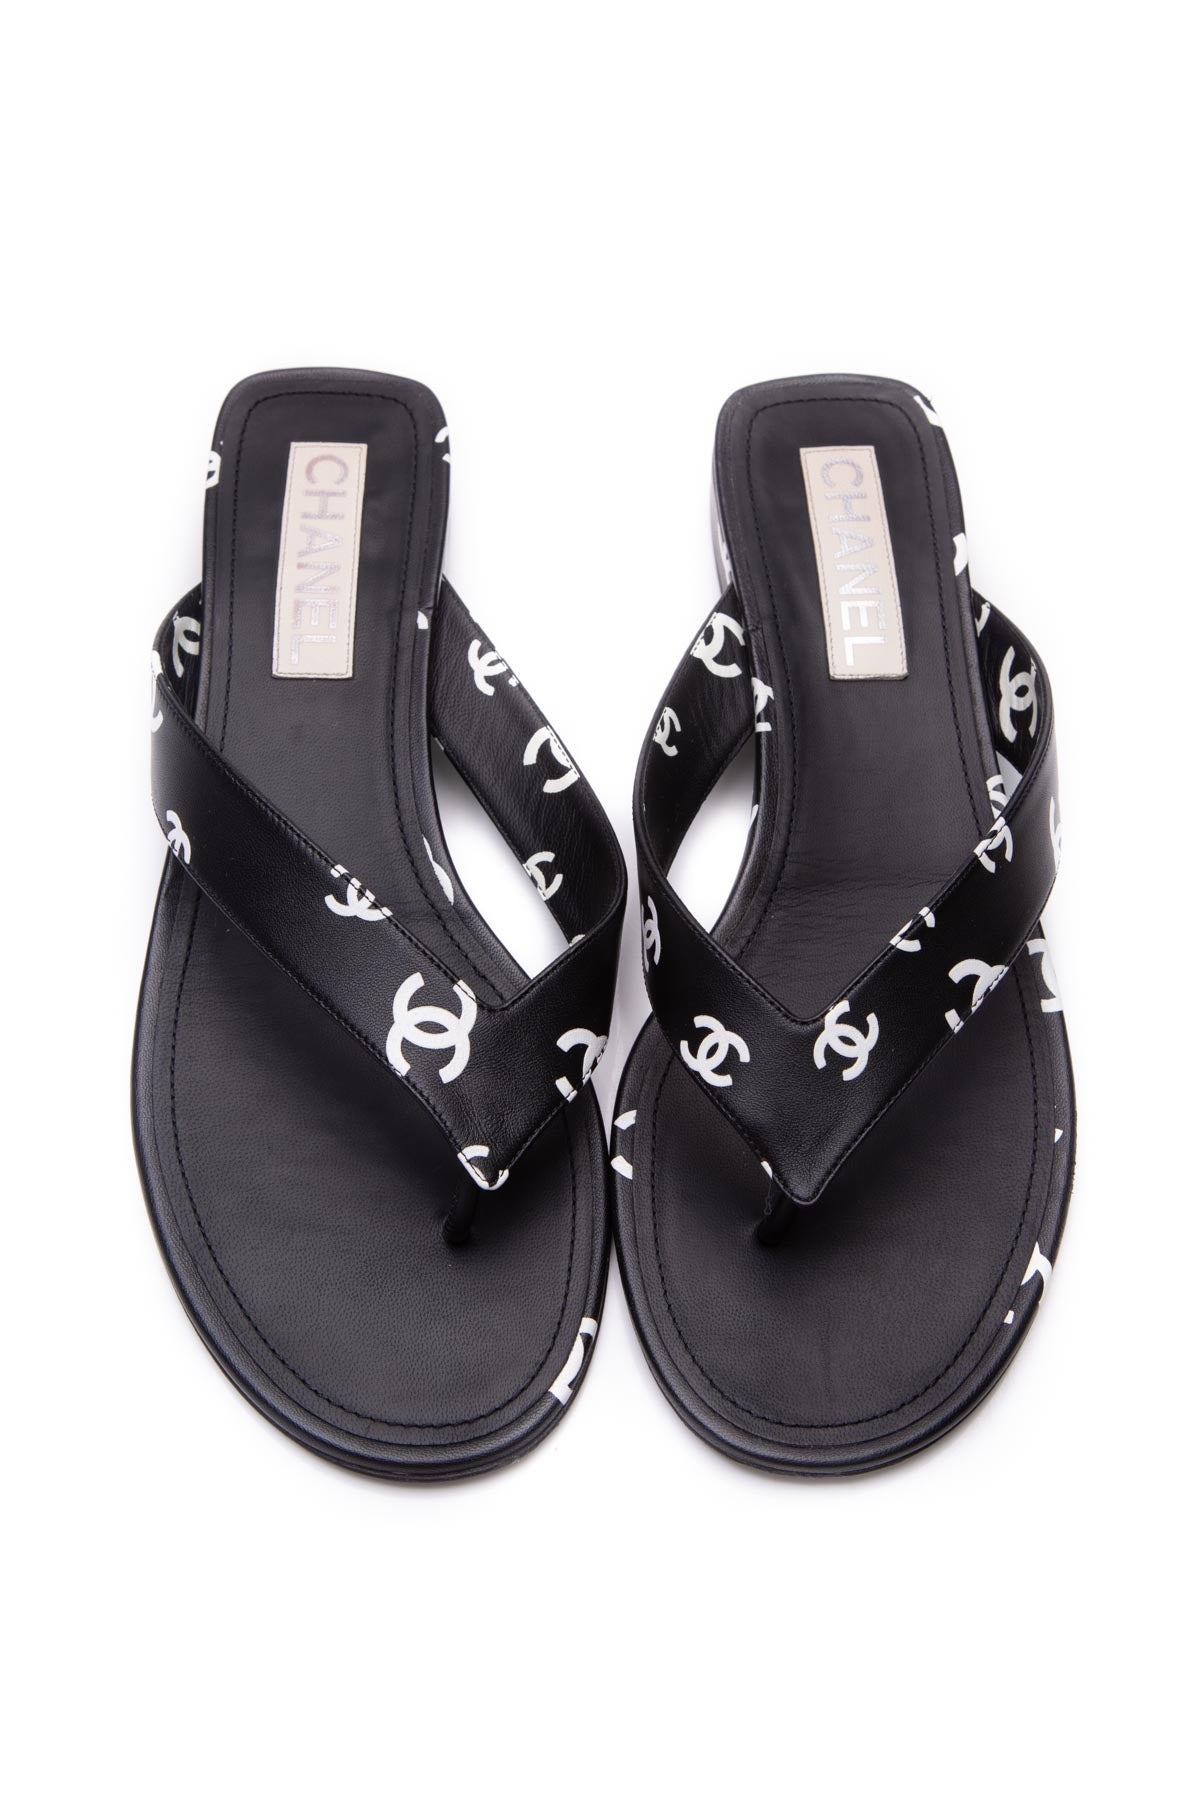 Chanel CC Thong Sandals - Size 42 - Couture USA